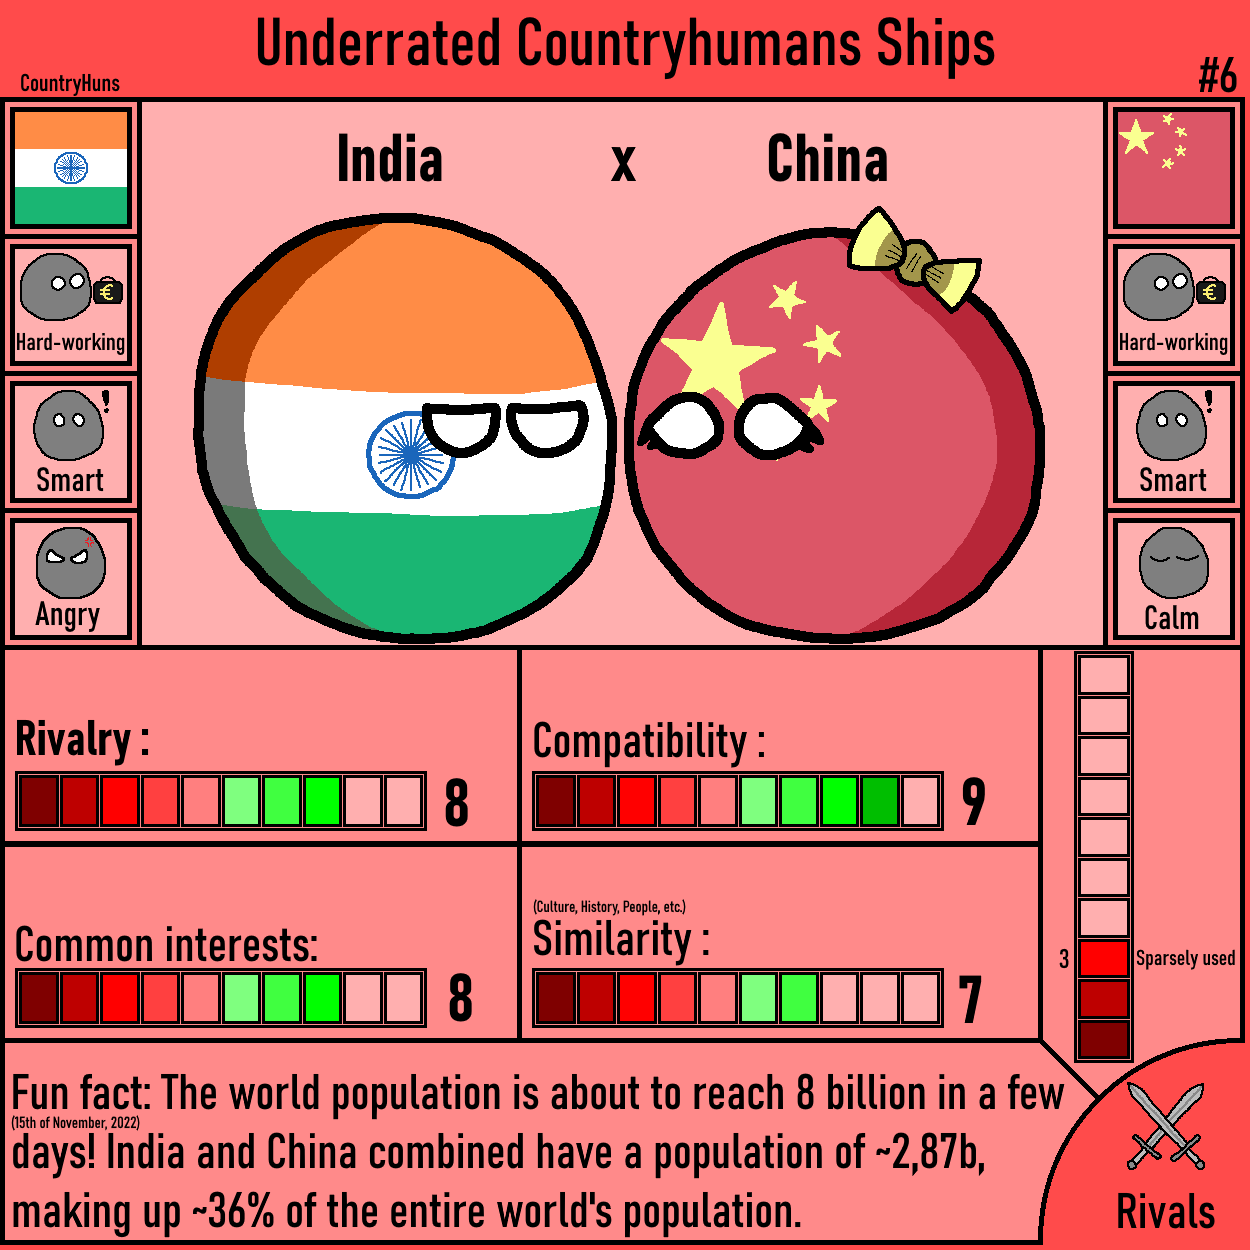 Underrated Countryhumans Ships 6-India x China by CountryHuns on DeviantArt